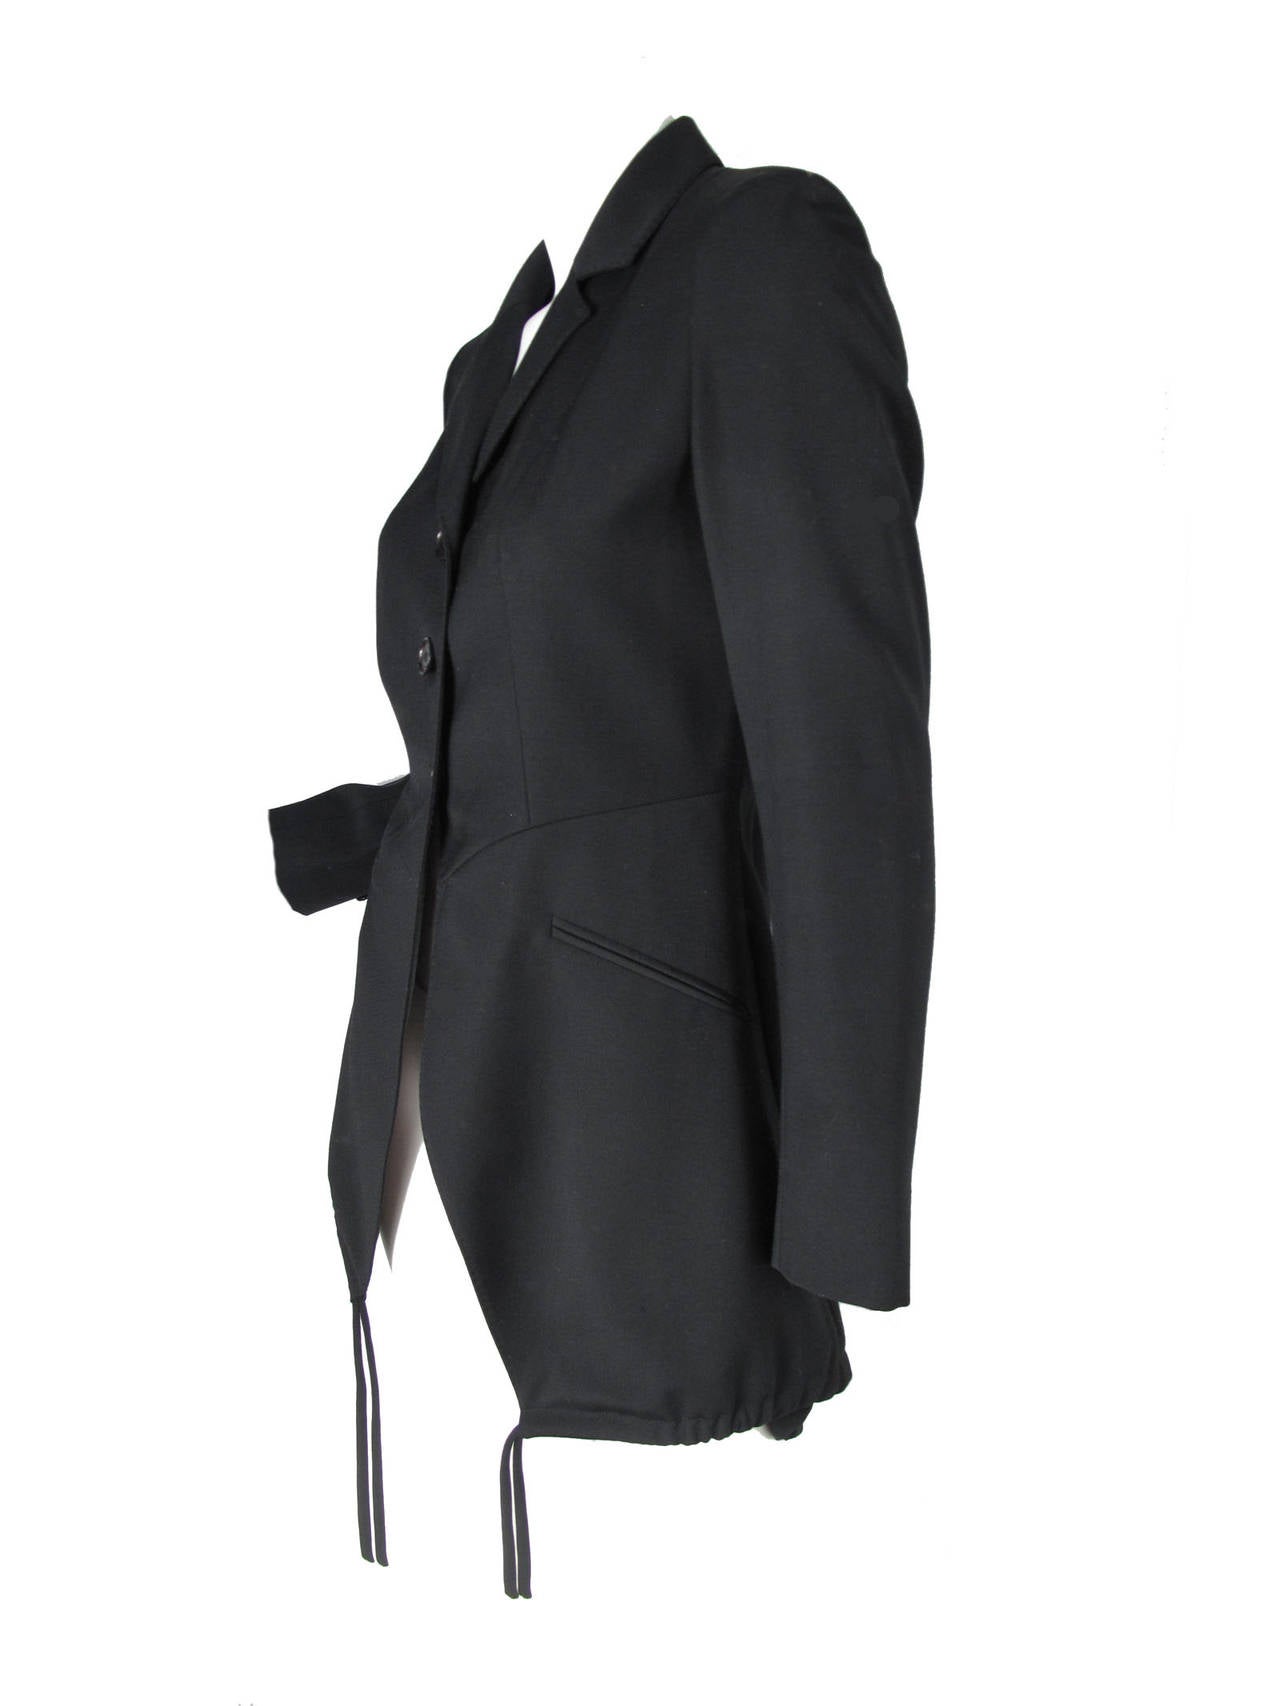 Moschino long black blazer with drawstring ties at hem on front and back.  Condition: very good, small pin hole in front, does not go through lining.   Size 8

36